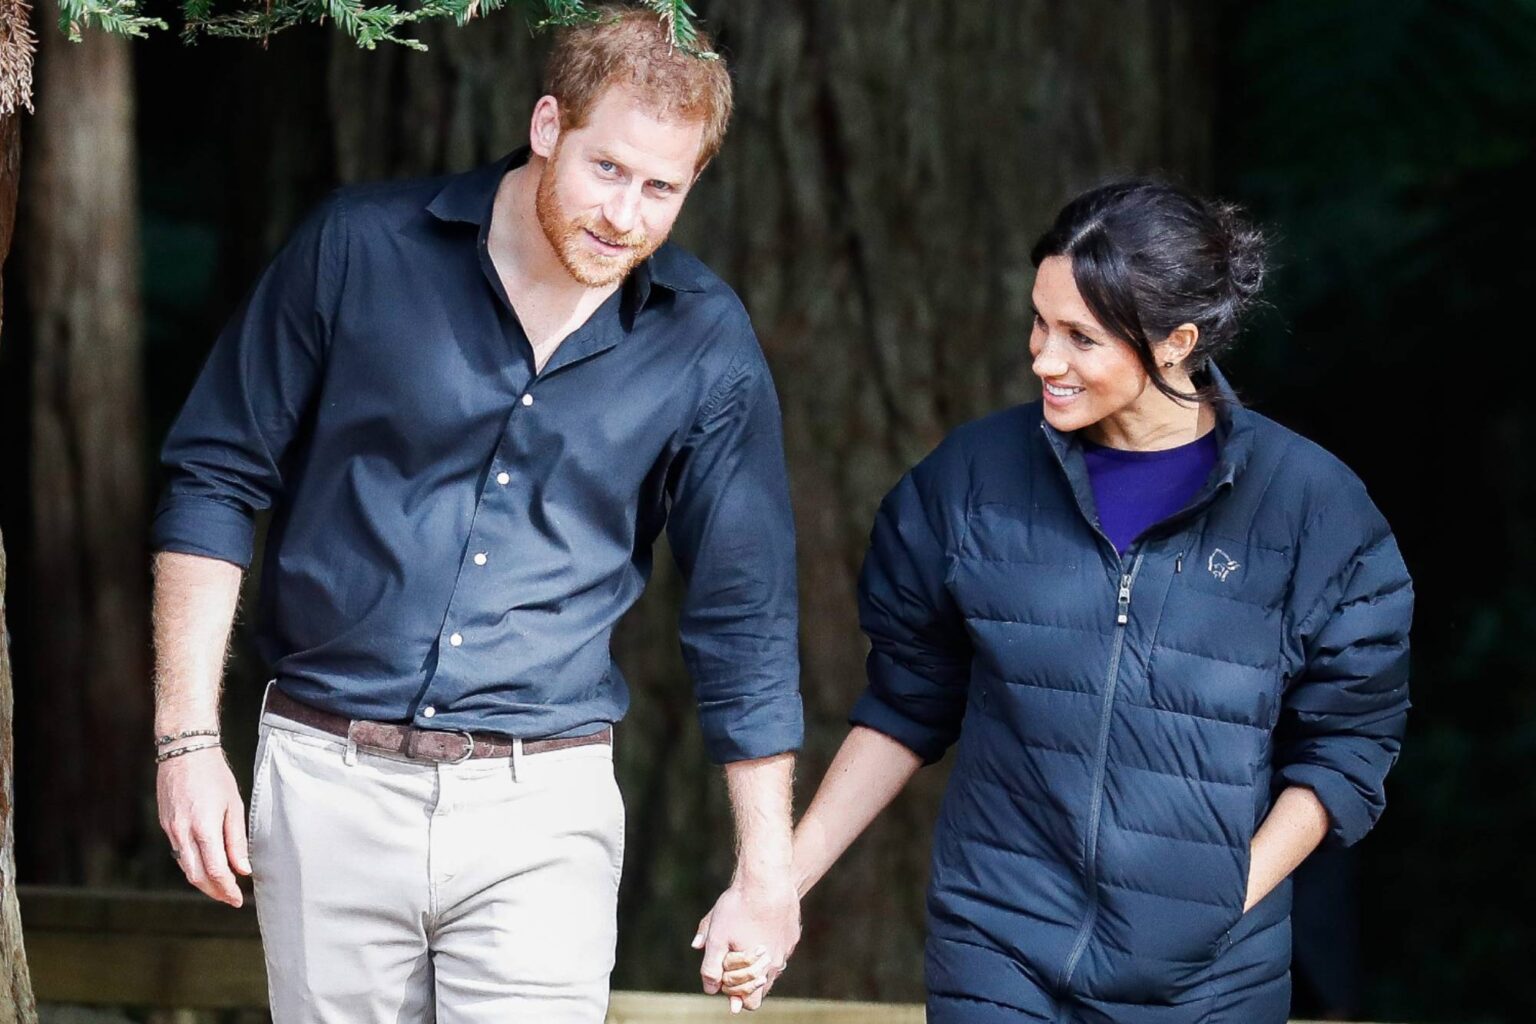 Prince Harry and Meghan have set up residence in the United States. Find out whether the former royals ever plan to return to the U.K.